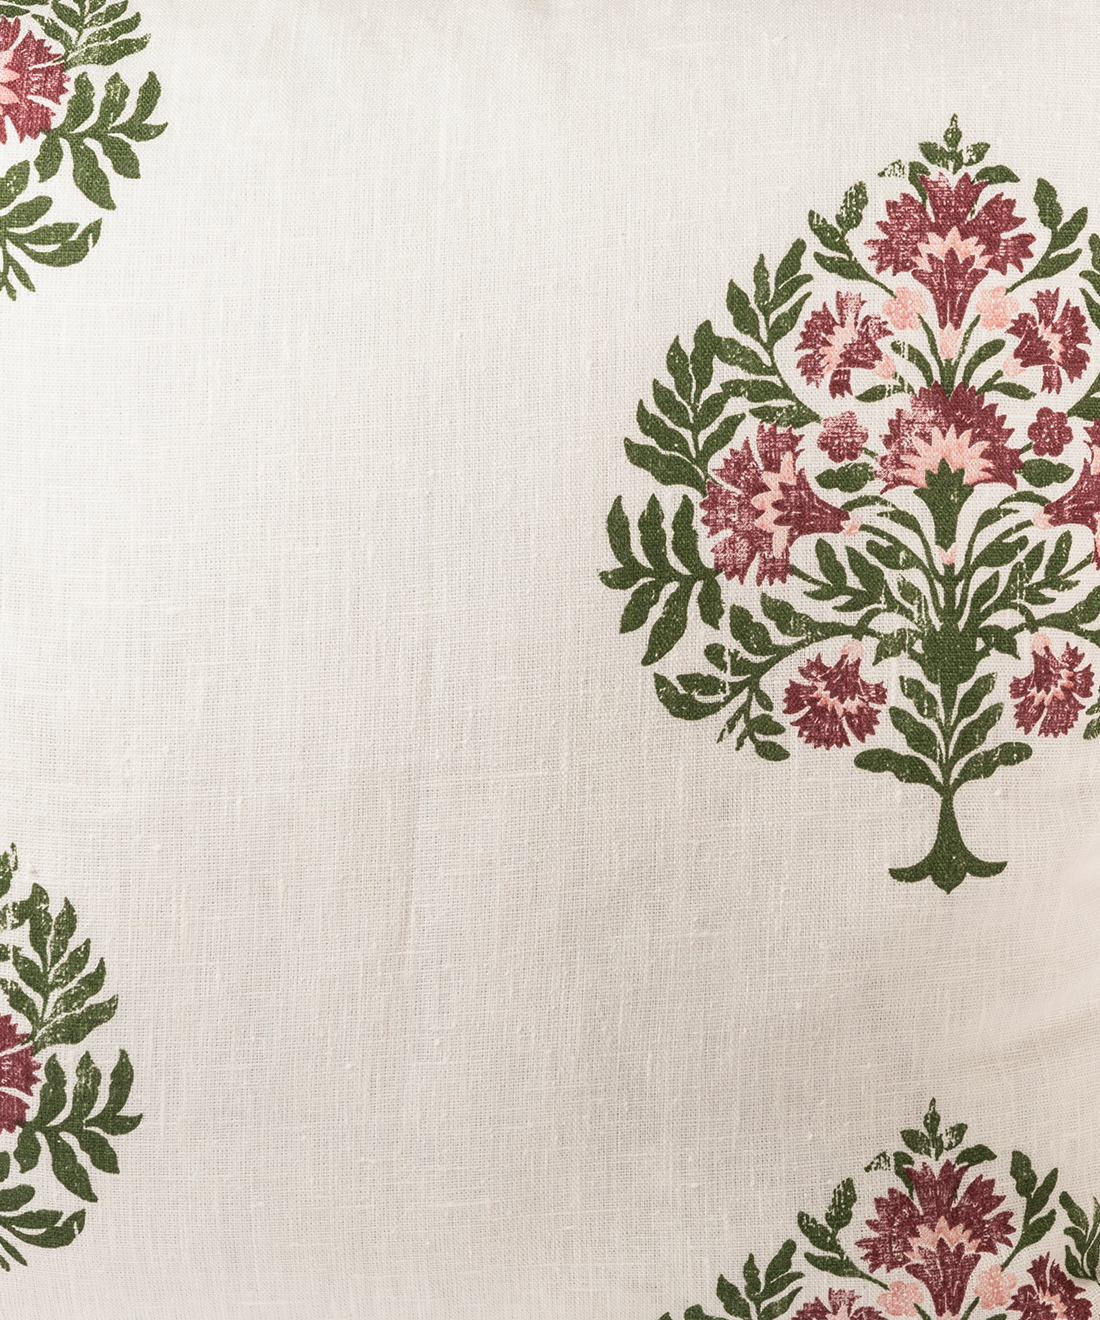 Whiteman & Mellor's Mughal, Cotton Fabric by the Meter